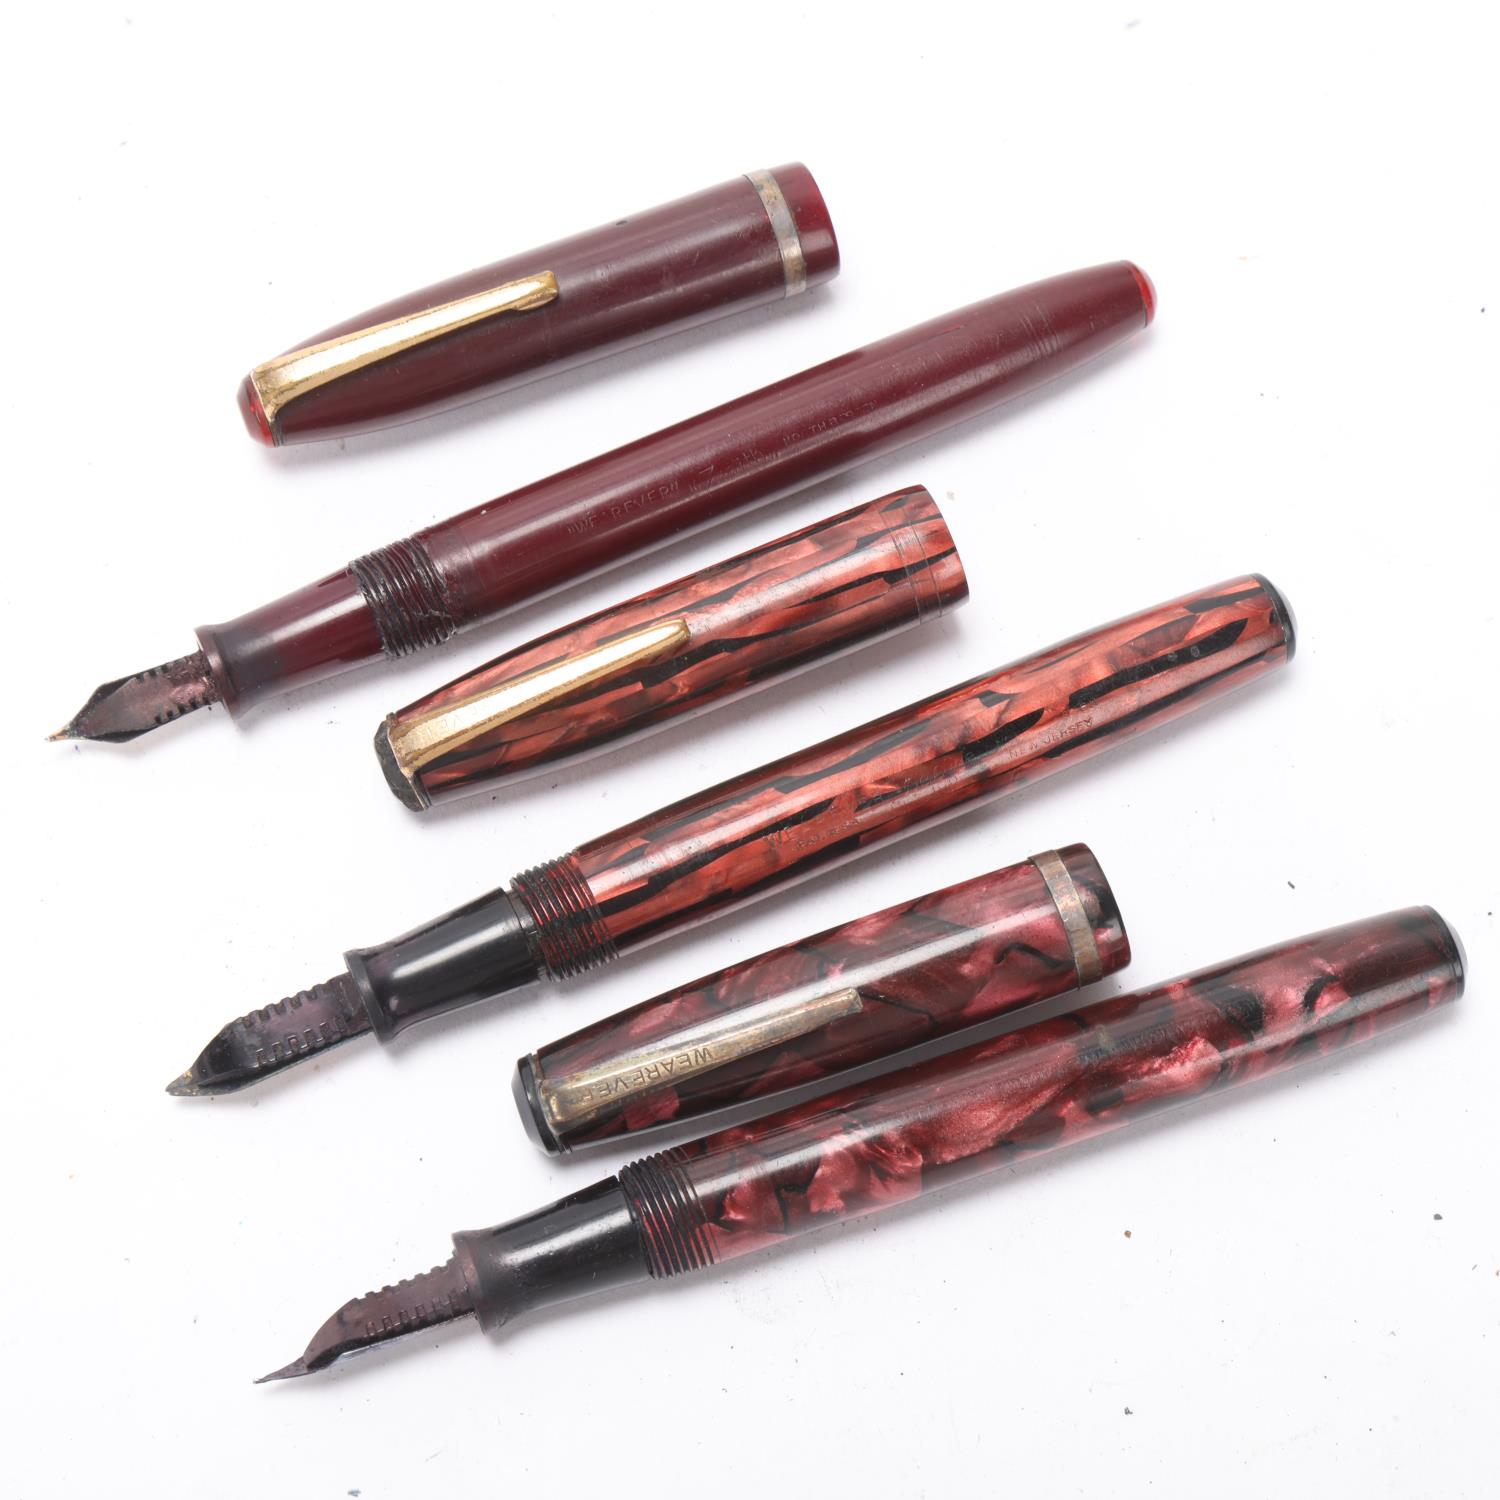 3 vintage Wearever, USA, lever fill fountain pens, circa 1940s' Marbled pens in complete untested - Image 3 of 4